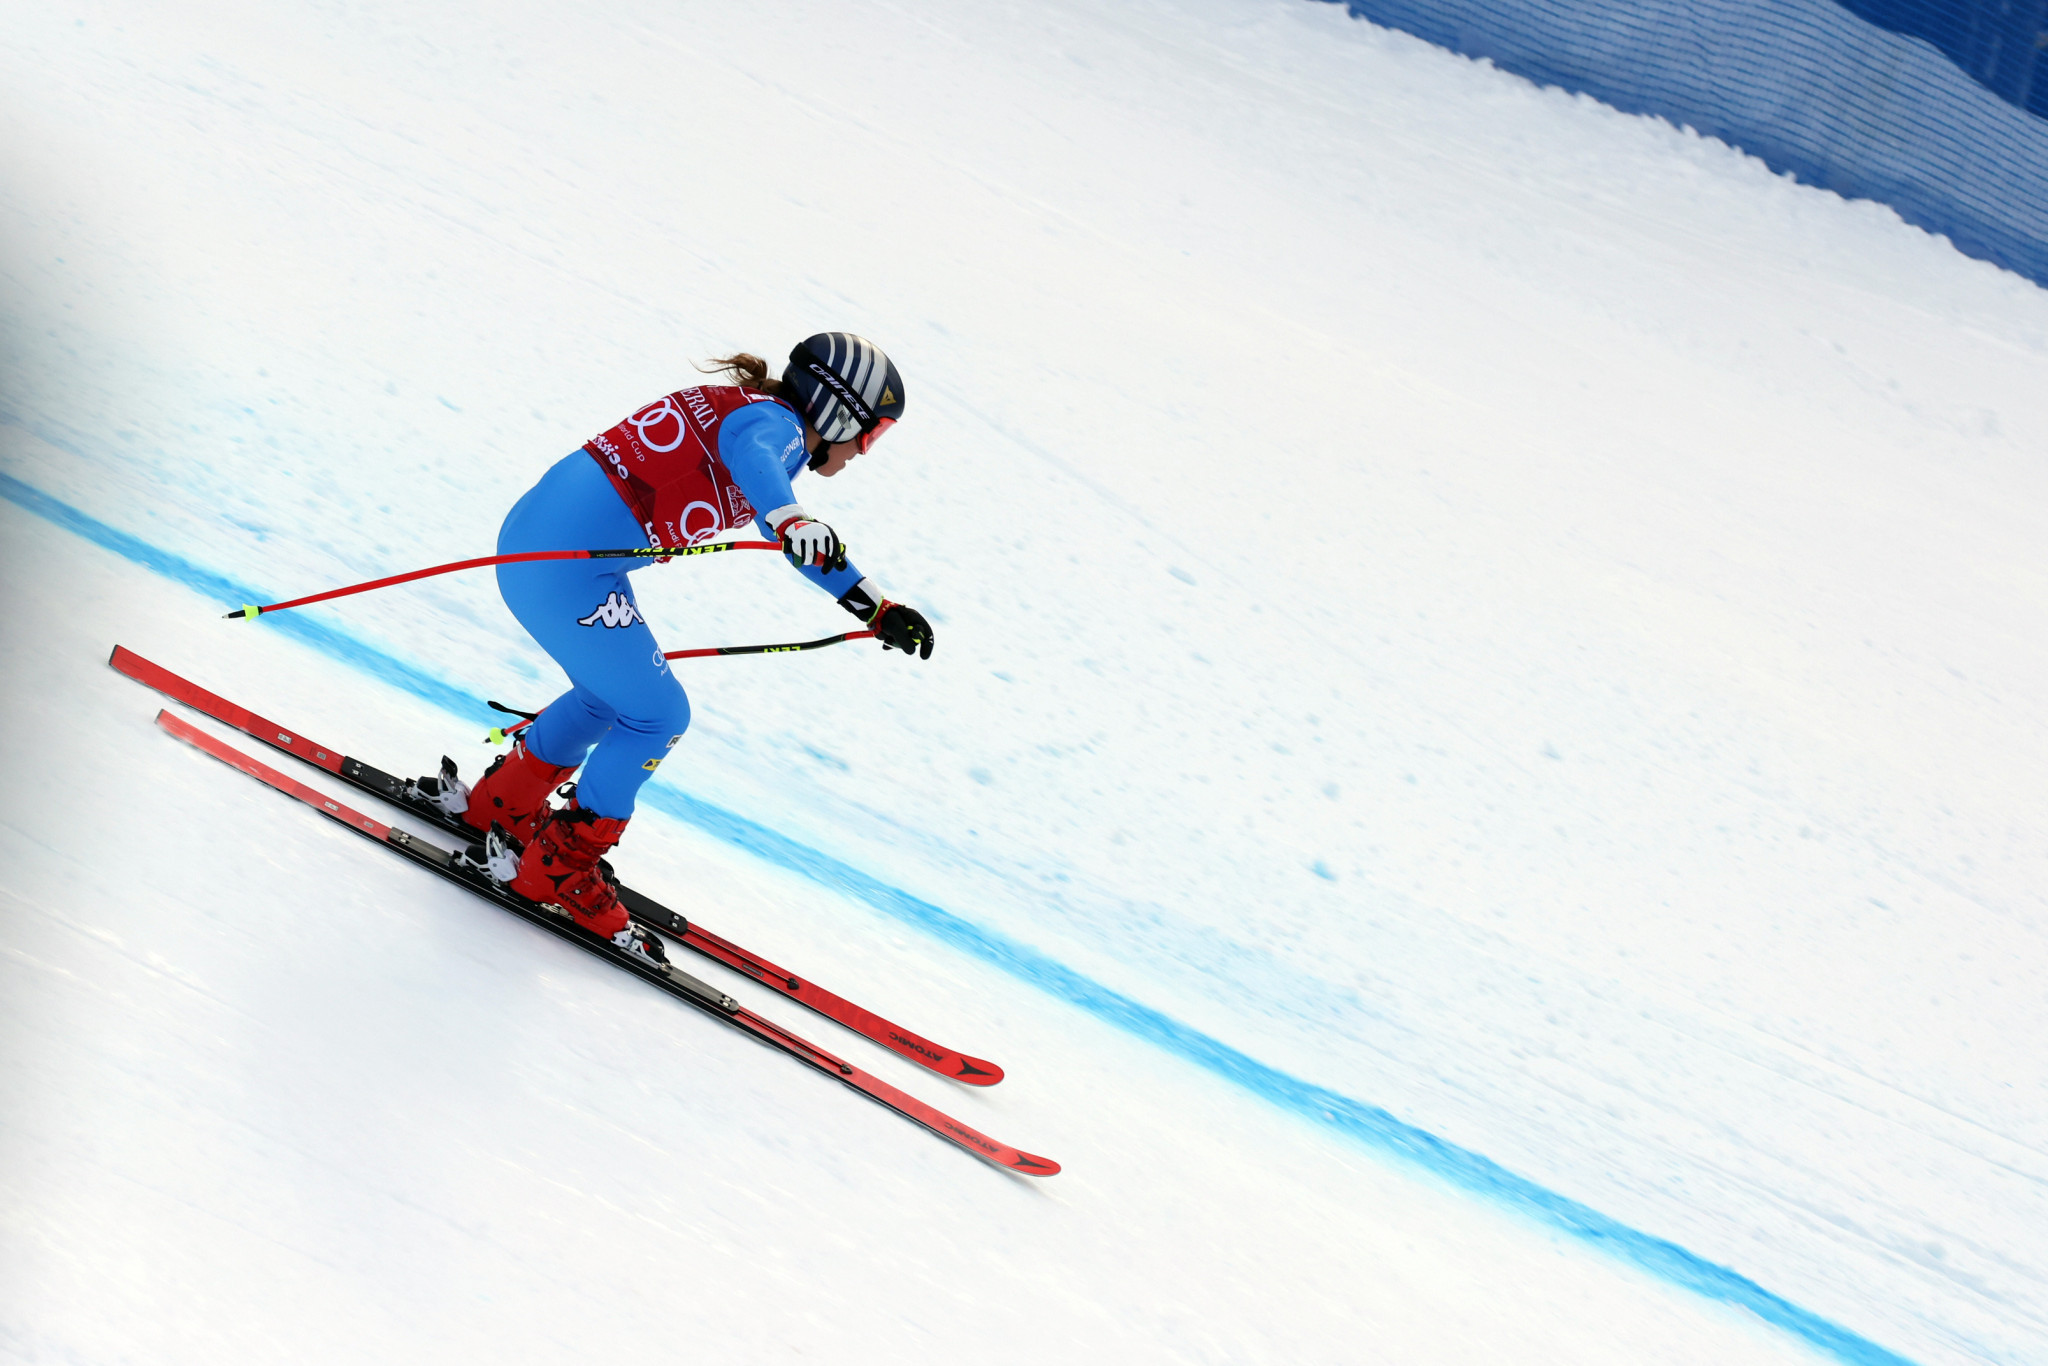 Sofia Goggia topped the opening qualification run in Lake Louise ©Getty Images